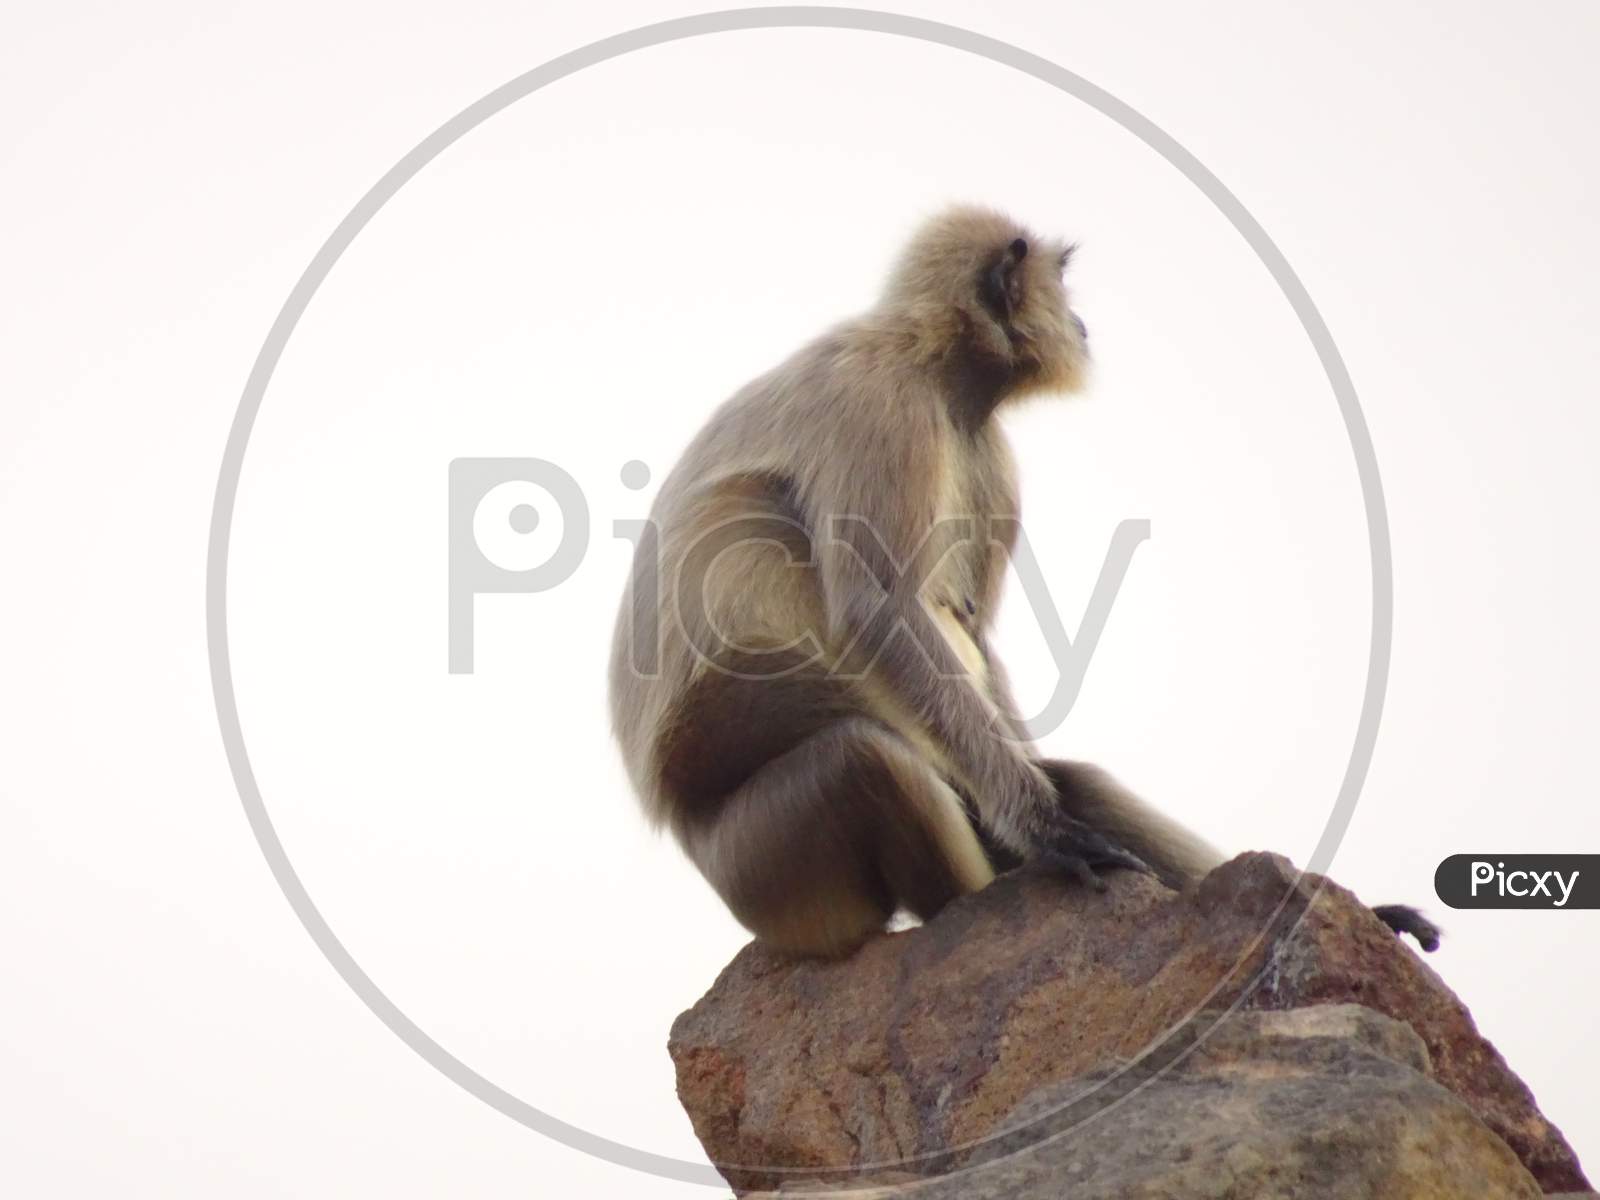 Monkey sitting at the cliff edge